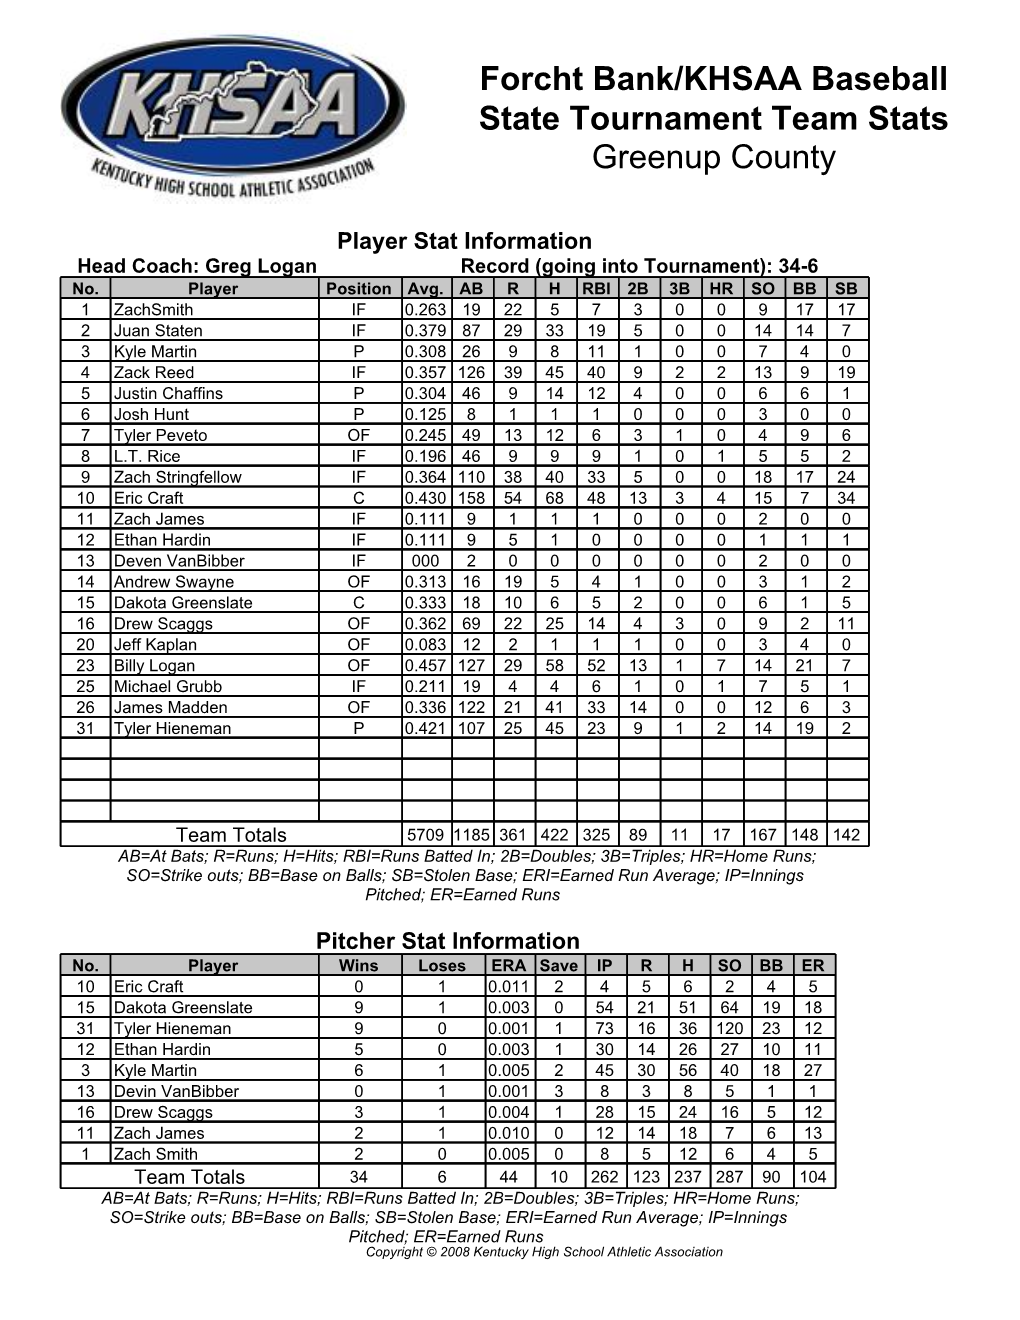 Forcht Bank/KHSAA Baseball State Tournament Team Stats Greenup County